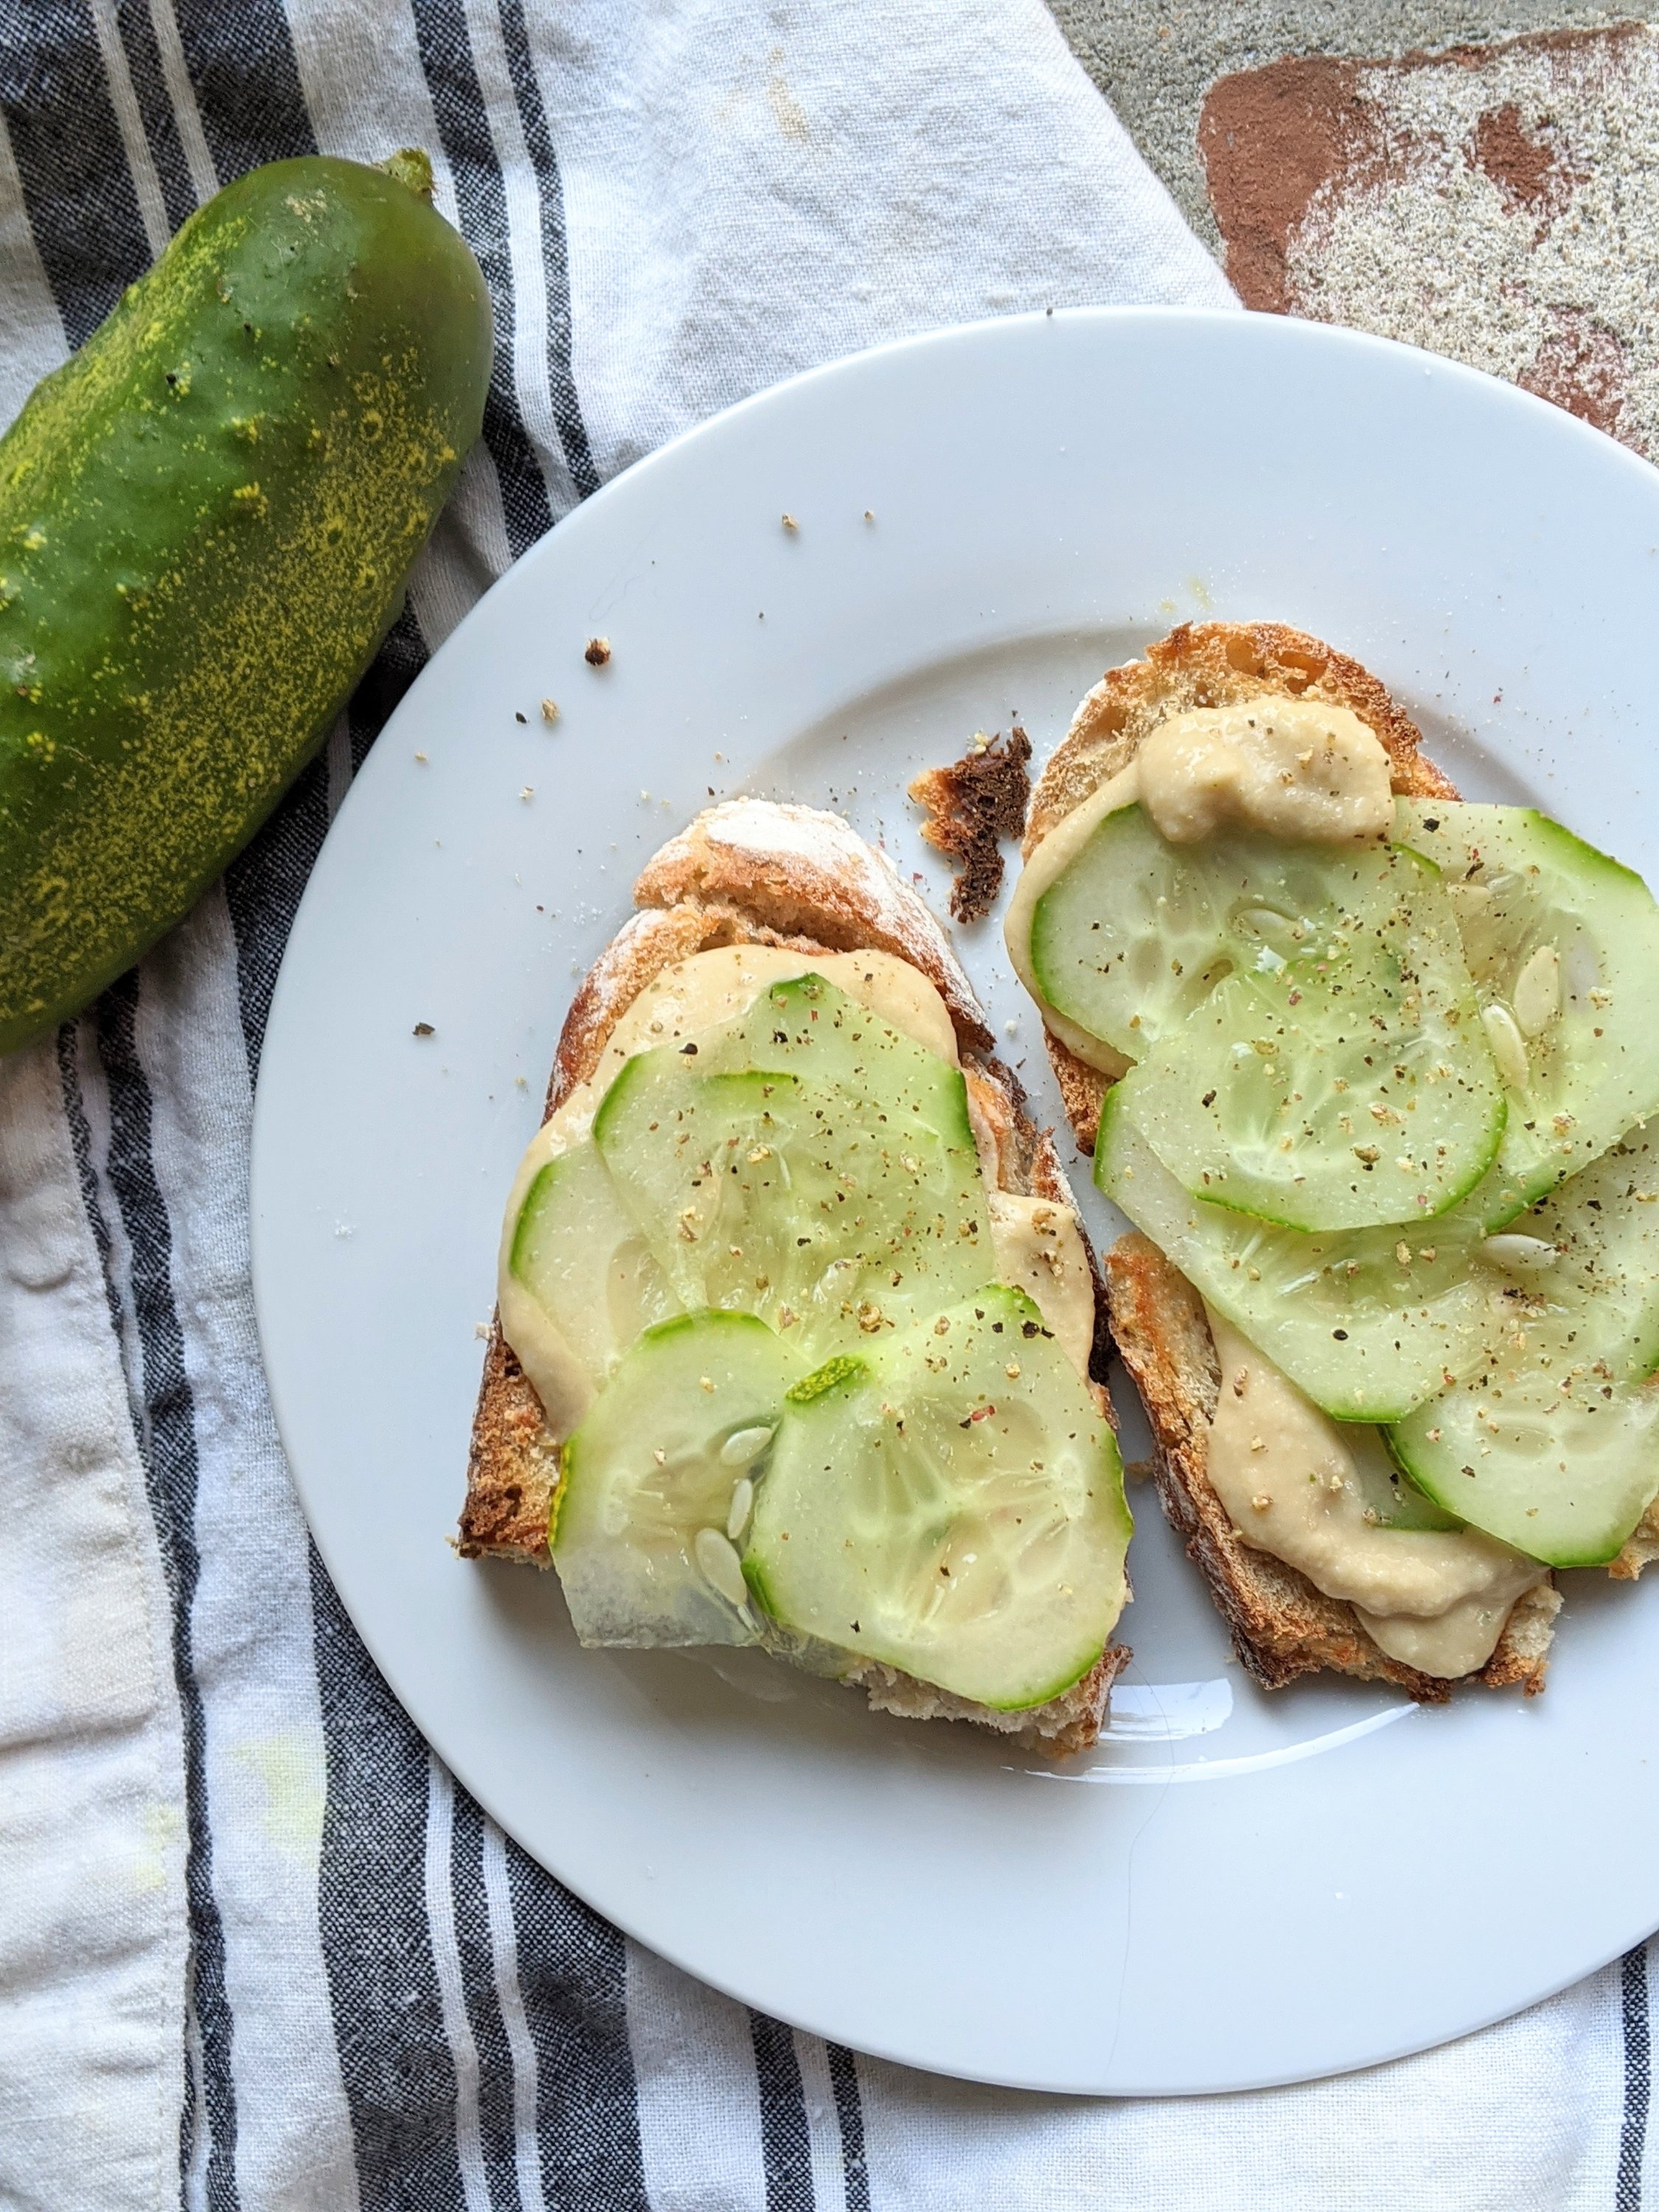 crunchy and fresh cucumber toast for breakfast with healthy hummus vegan breakfast ideas and recipes gluten free